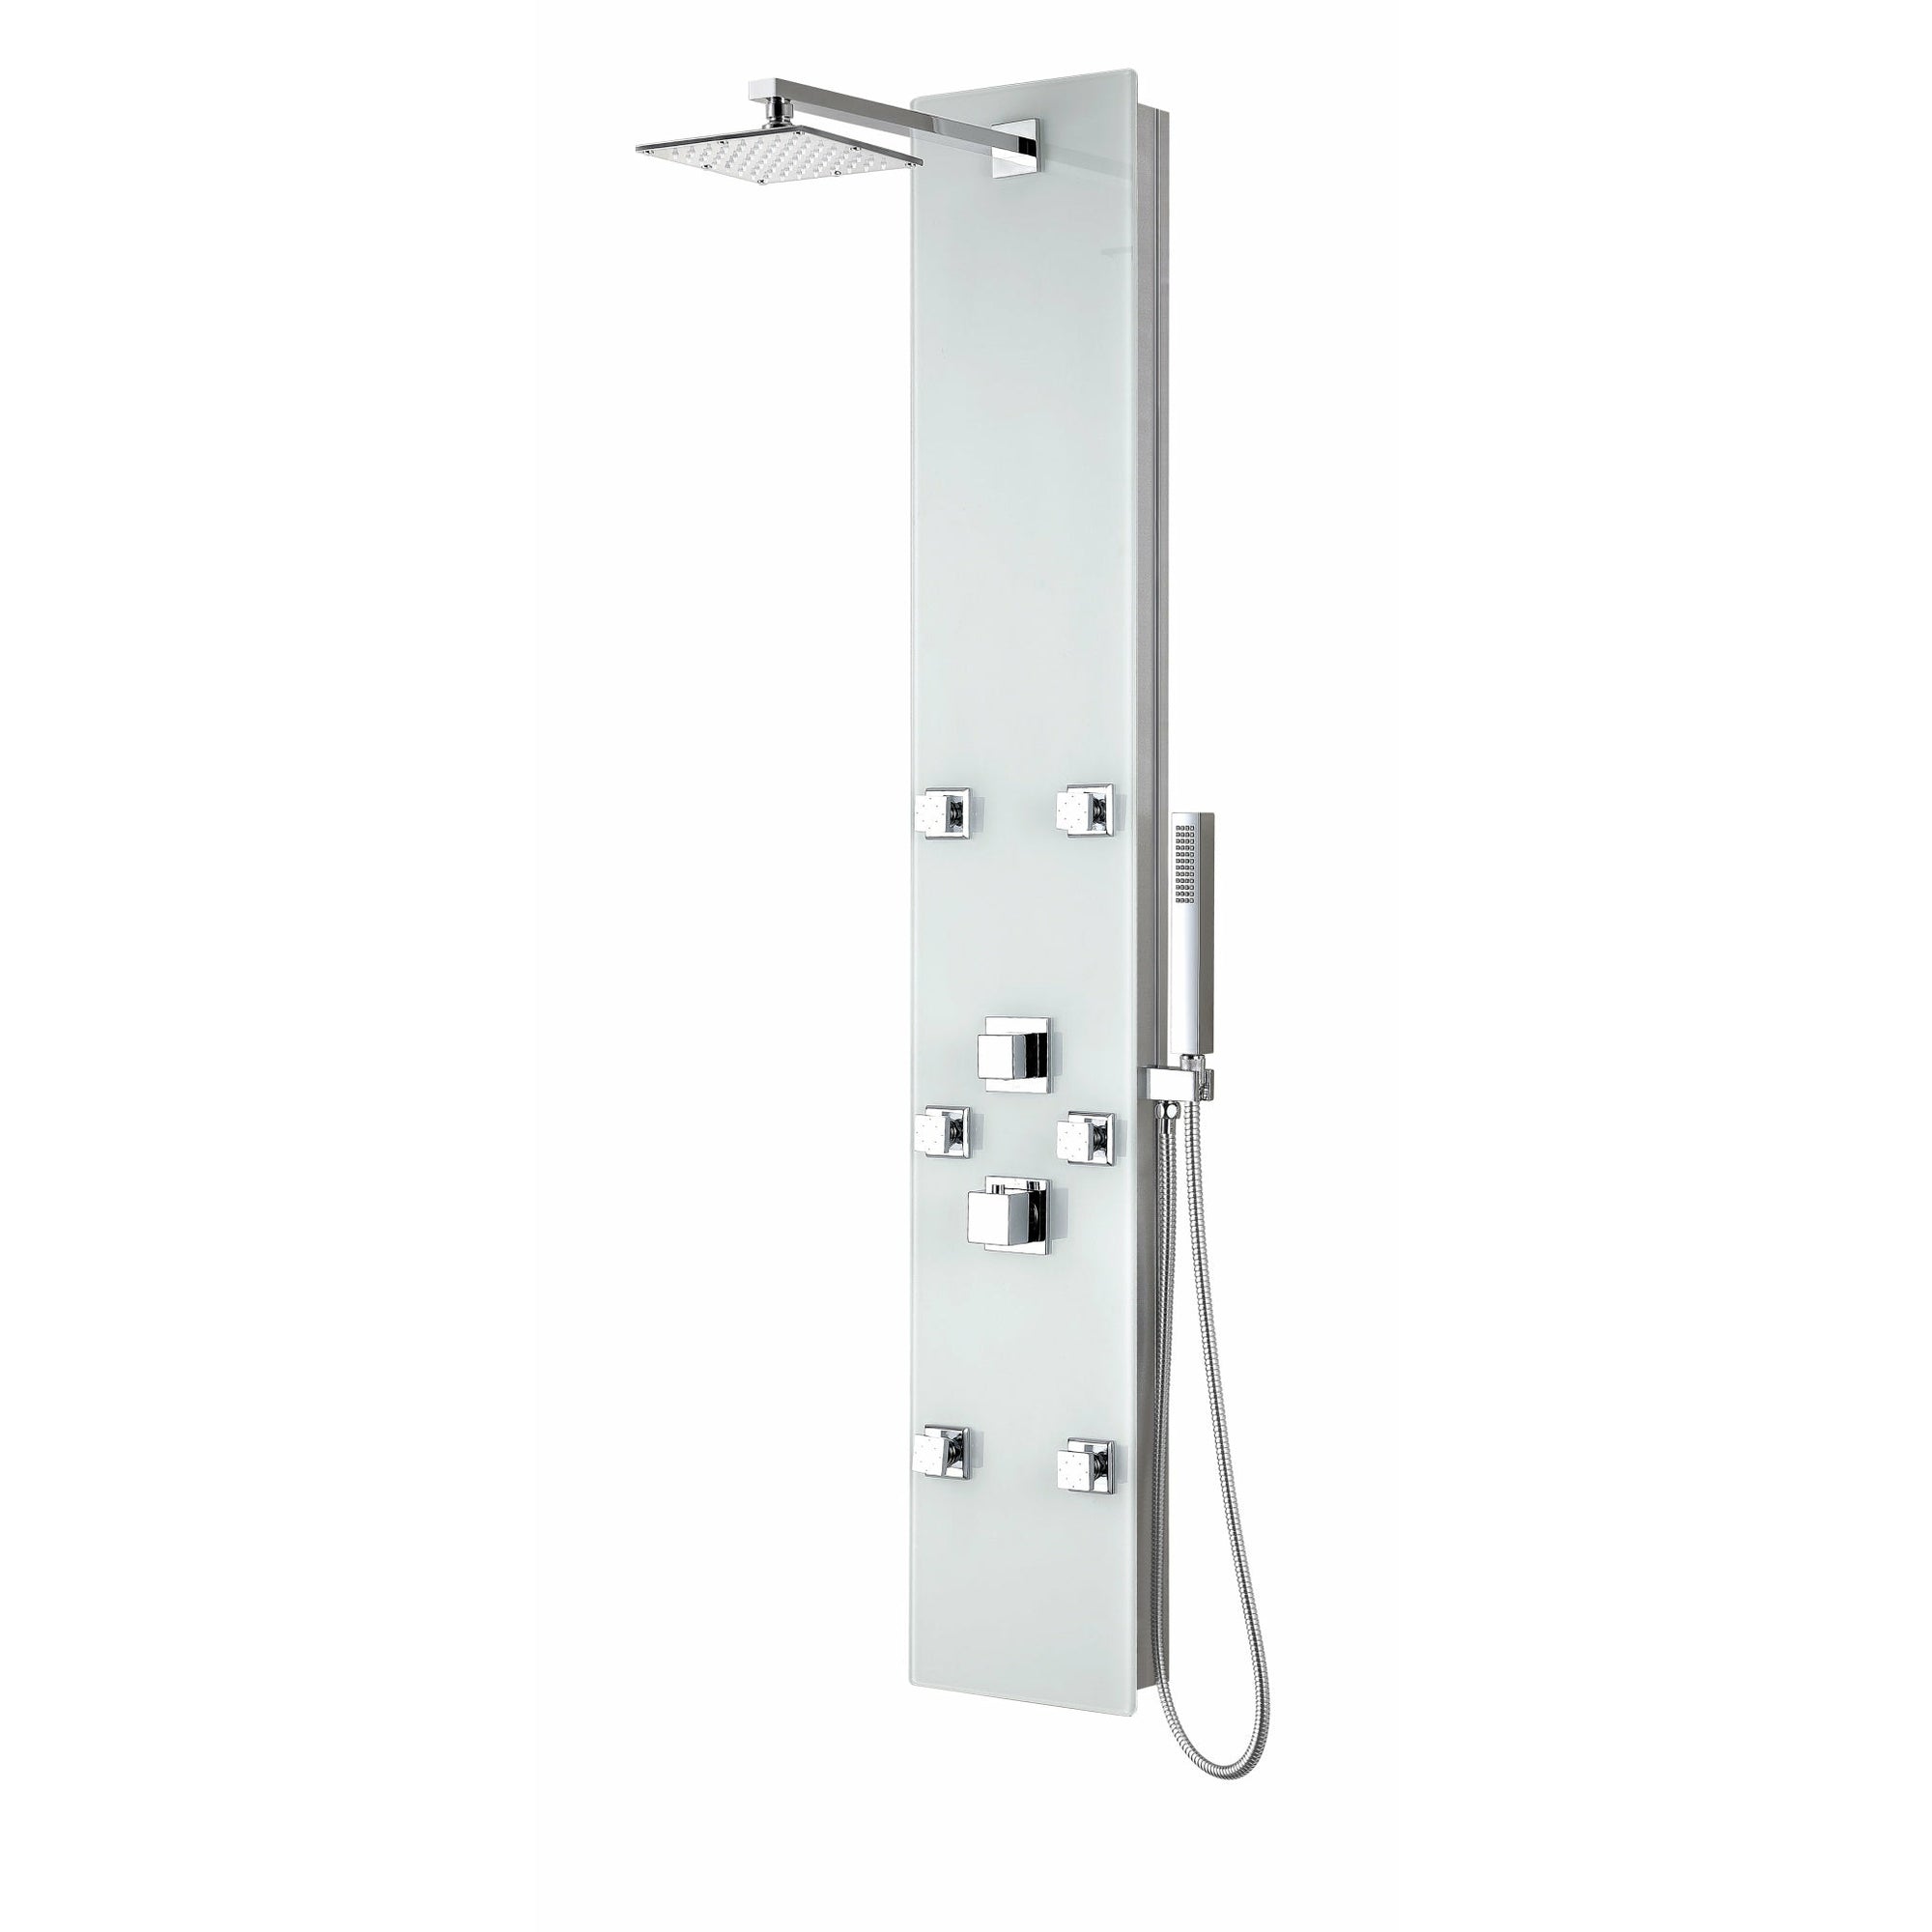 Anzzi Rhaus 60 Inch Six Directional Acu-stream Body Jets Shower Panel with Swiveling Overhead Rainfall Shower Head, Two Shower Control Knobs and Euro-grip Handheld Sprayer - White Deco-glass Body - SP-AZ029 - Vital Hydrotherapy